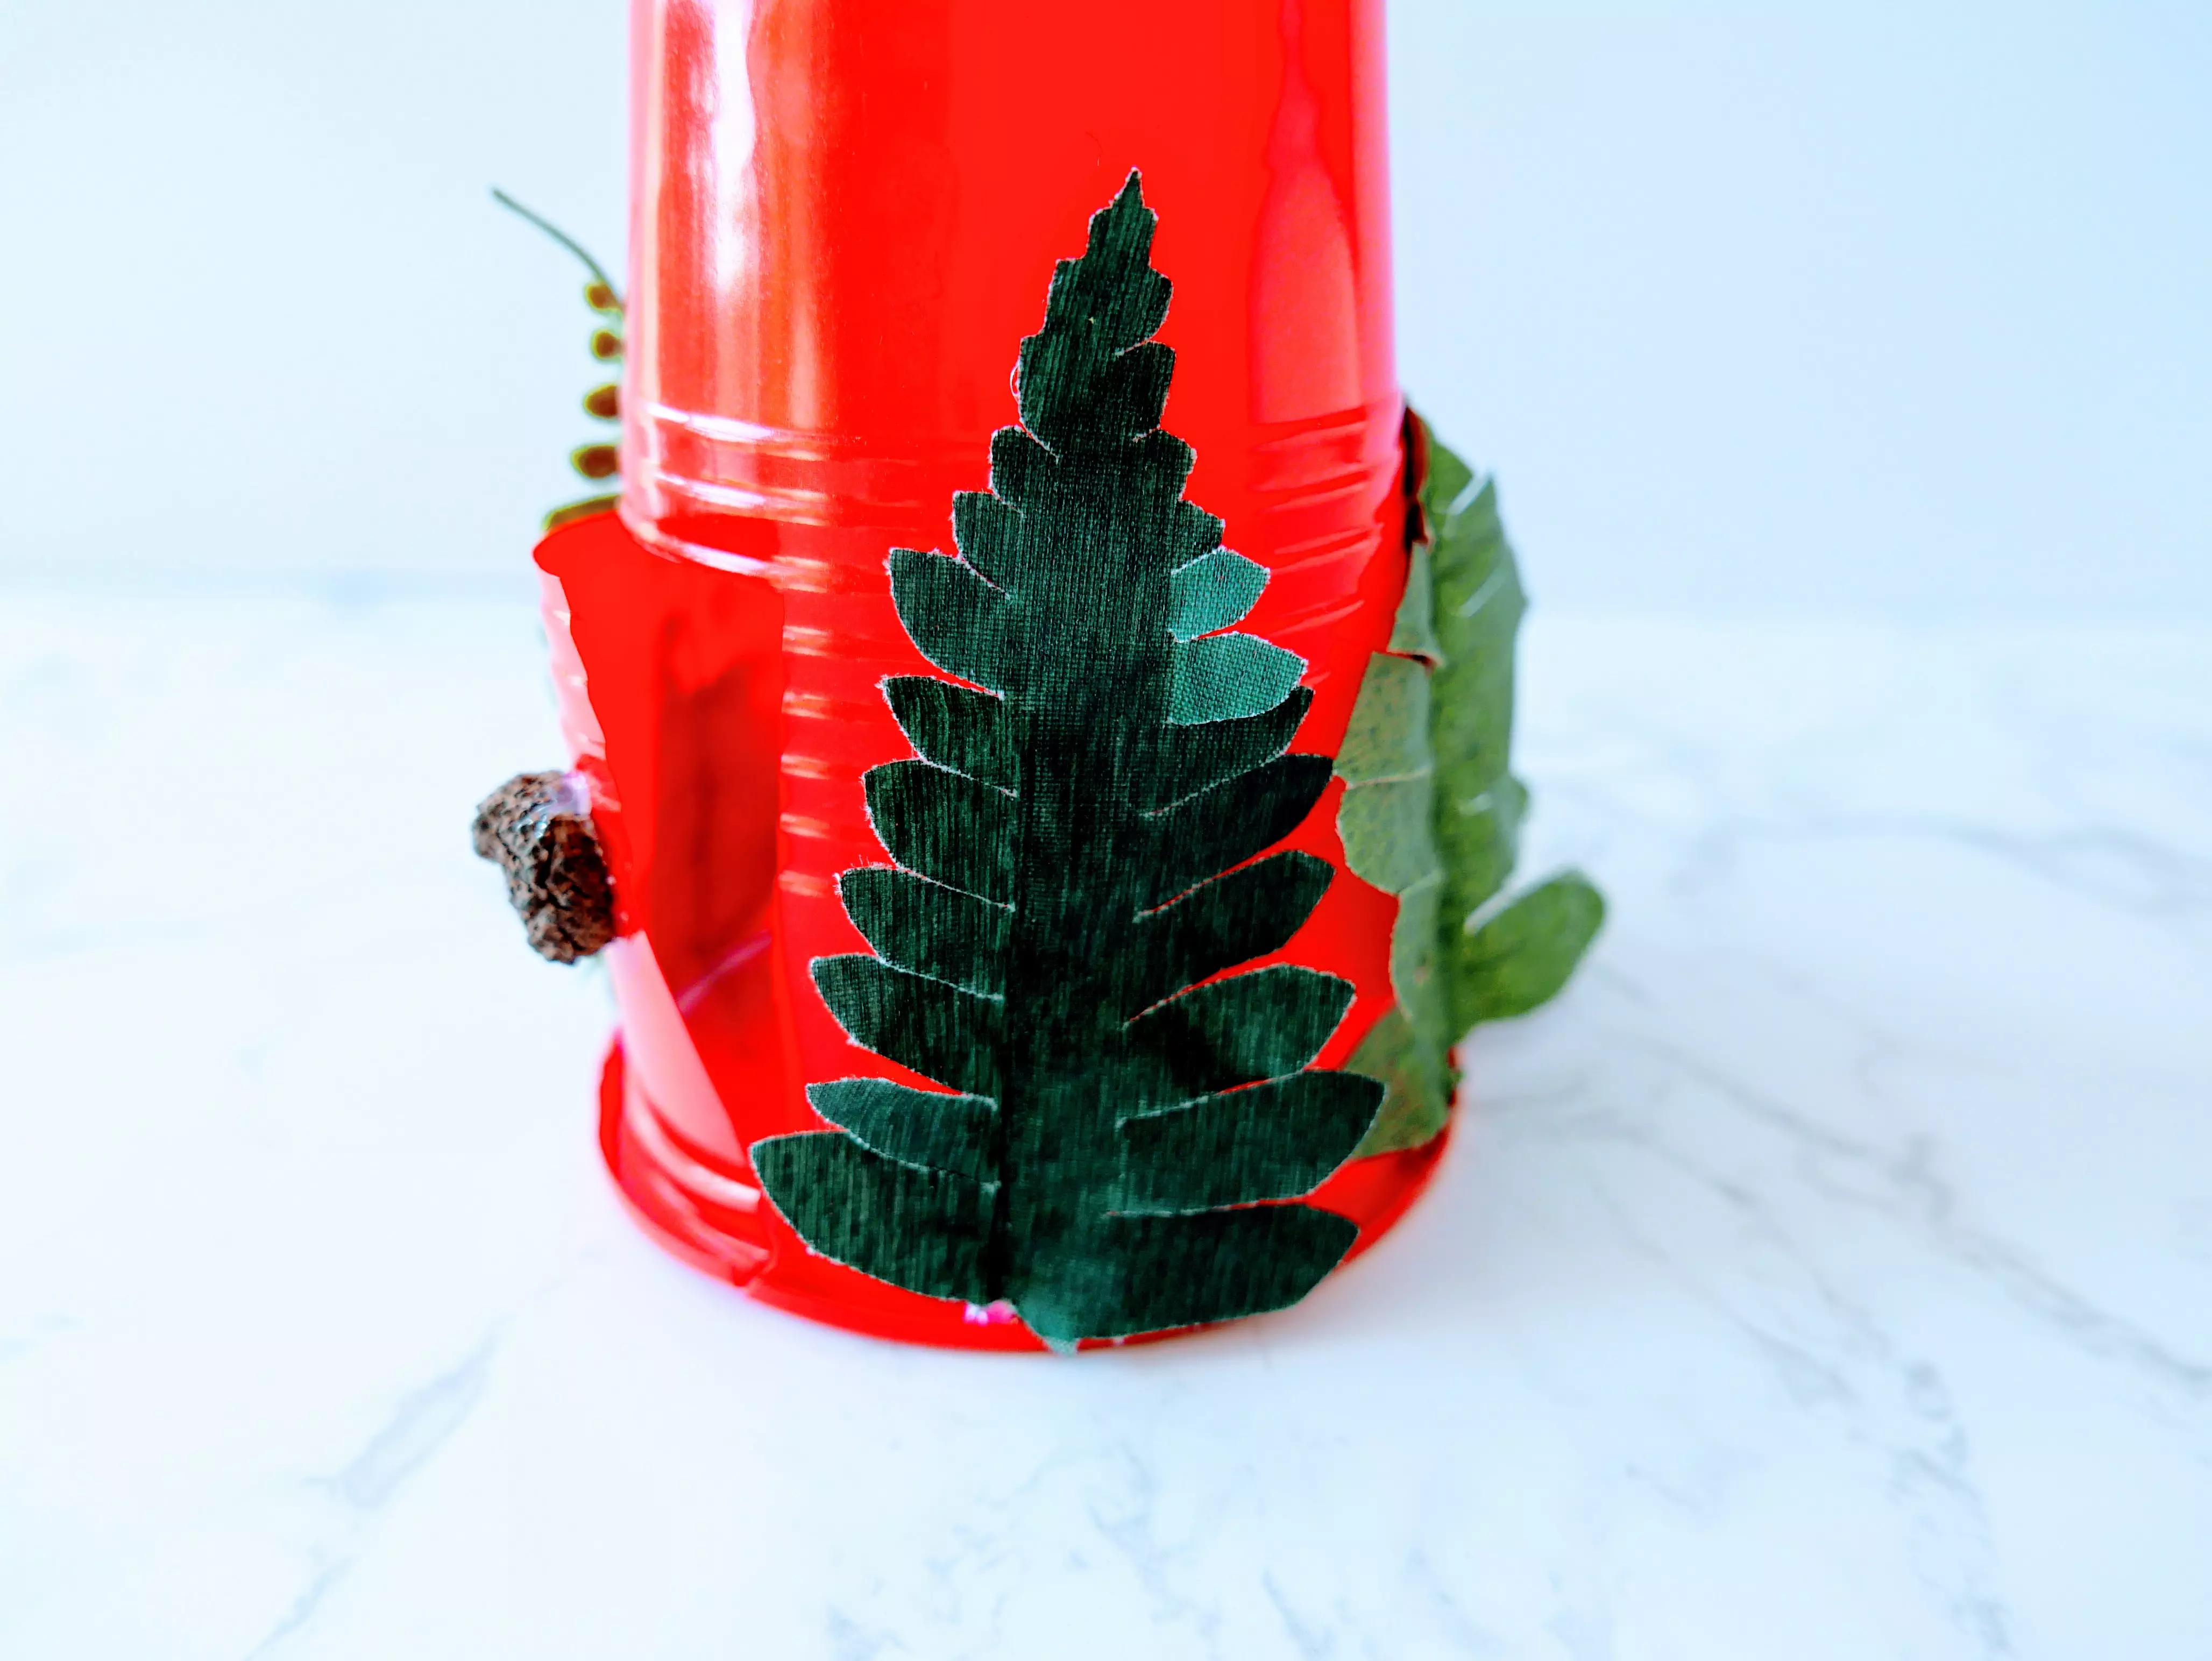 gluing greenery to a plastic cup